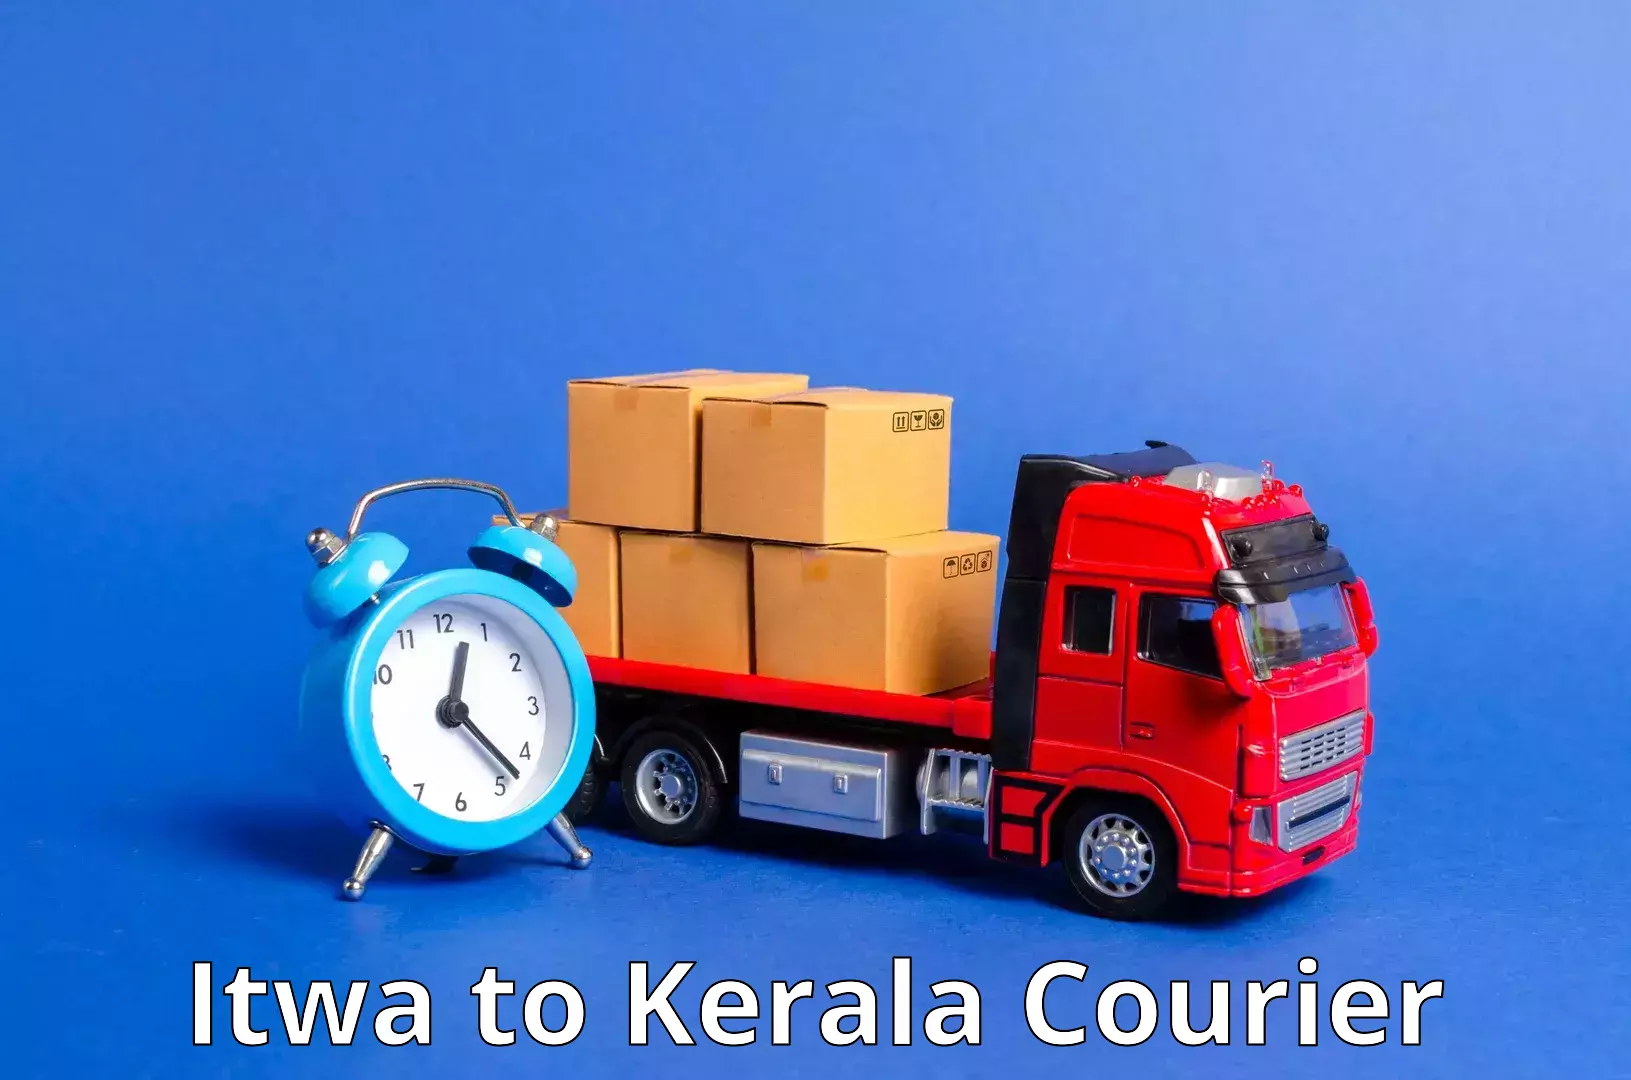 Full-service courier options Itwa to Kerala